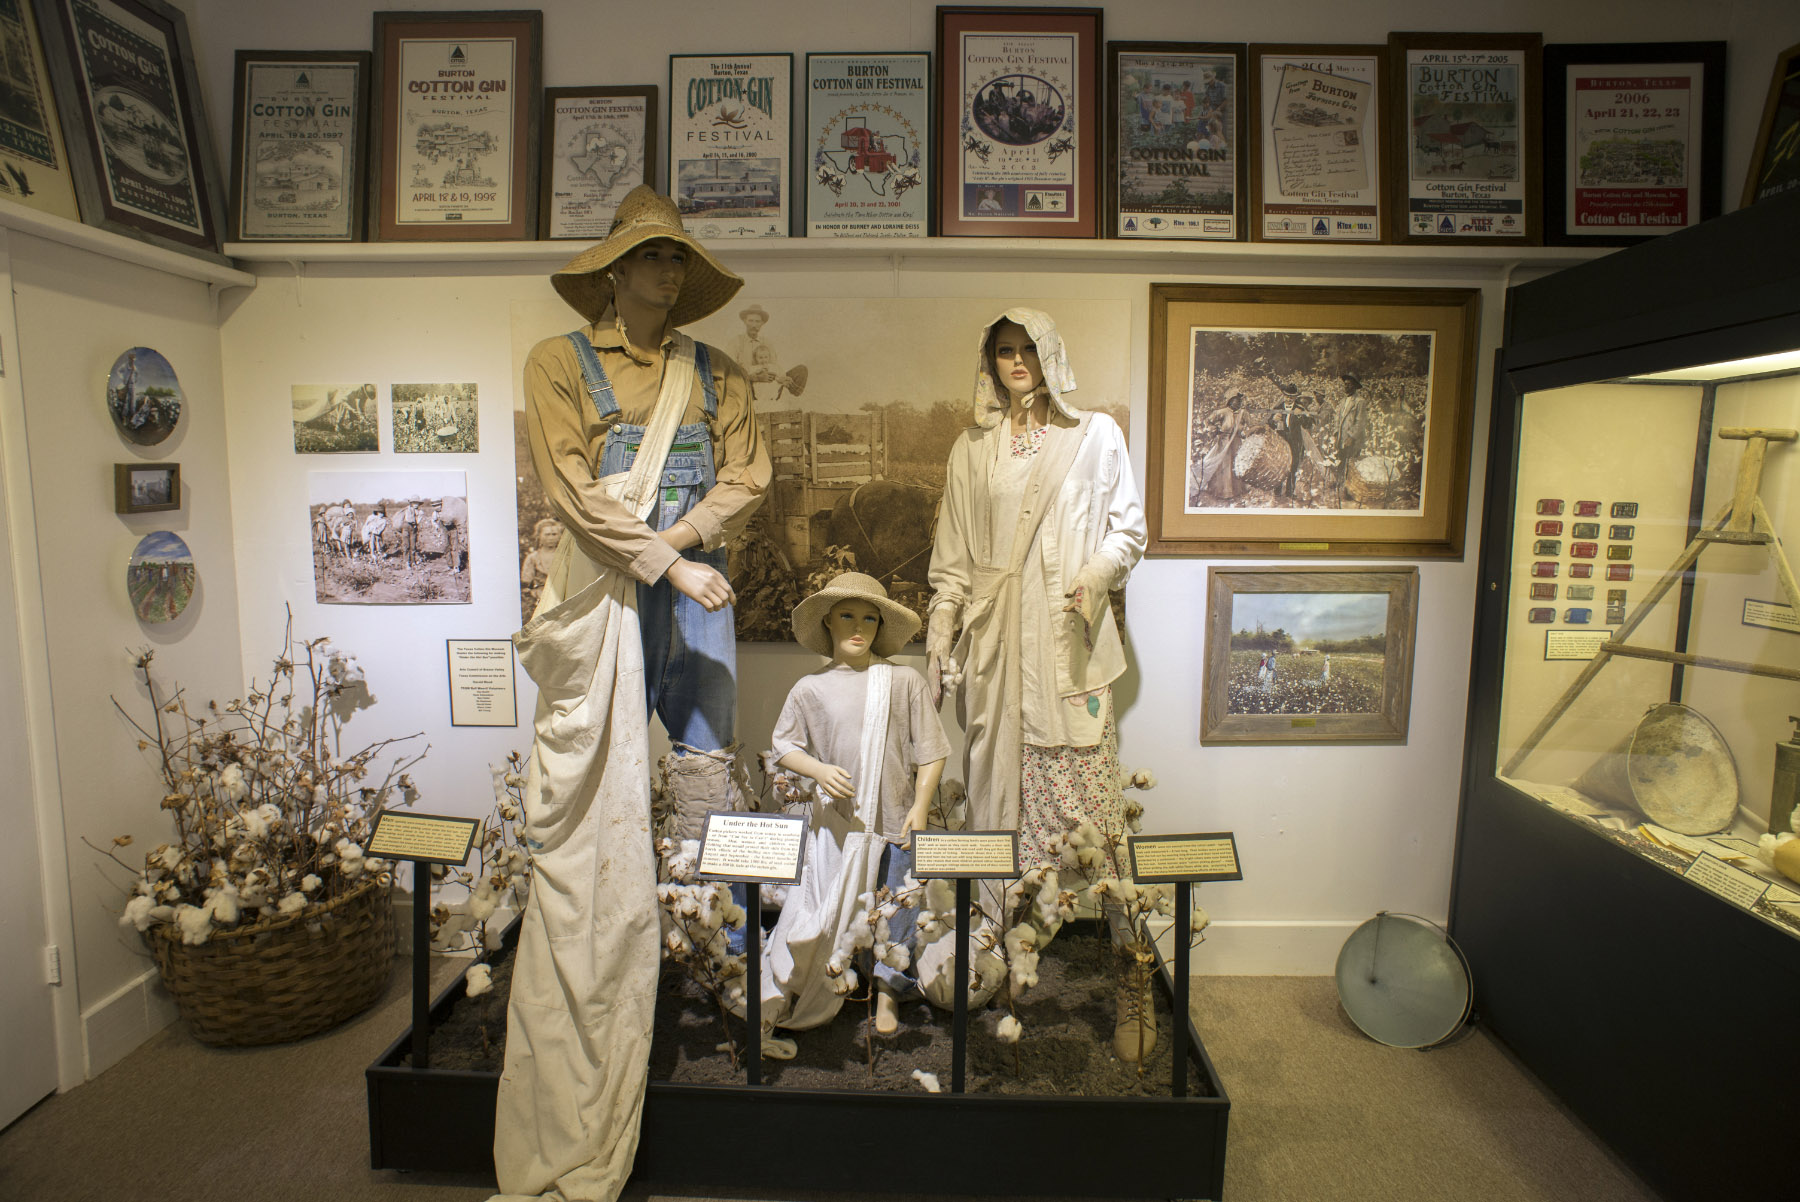 Mannequins dressed in old-timey farm attire stand on a platform in front of a wall lined with old photos and posters at the Texas Cotton Gin Museum in Burton. Photo by Kevin B. Stillman.